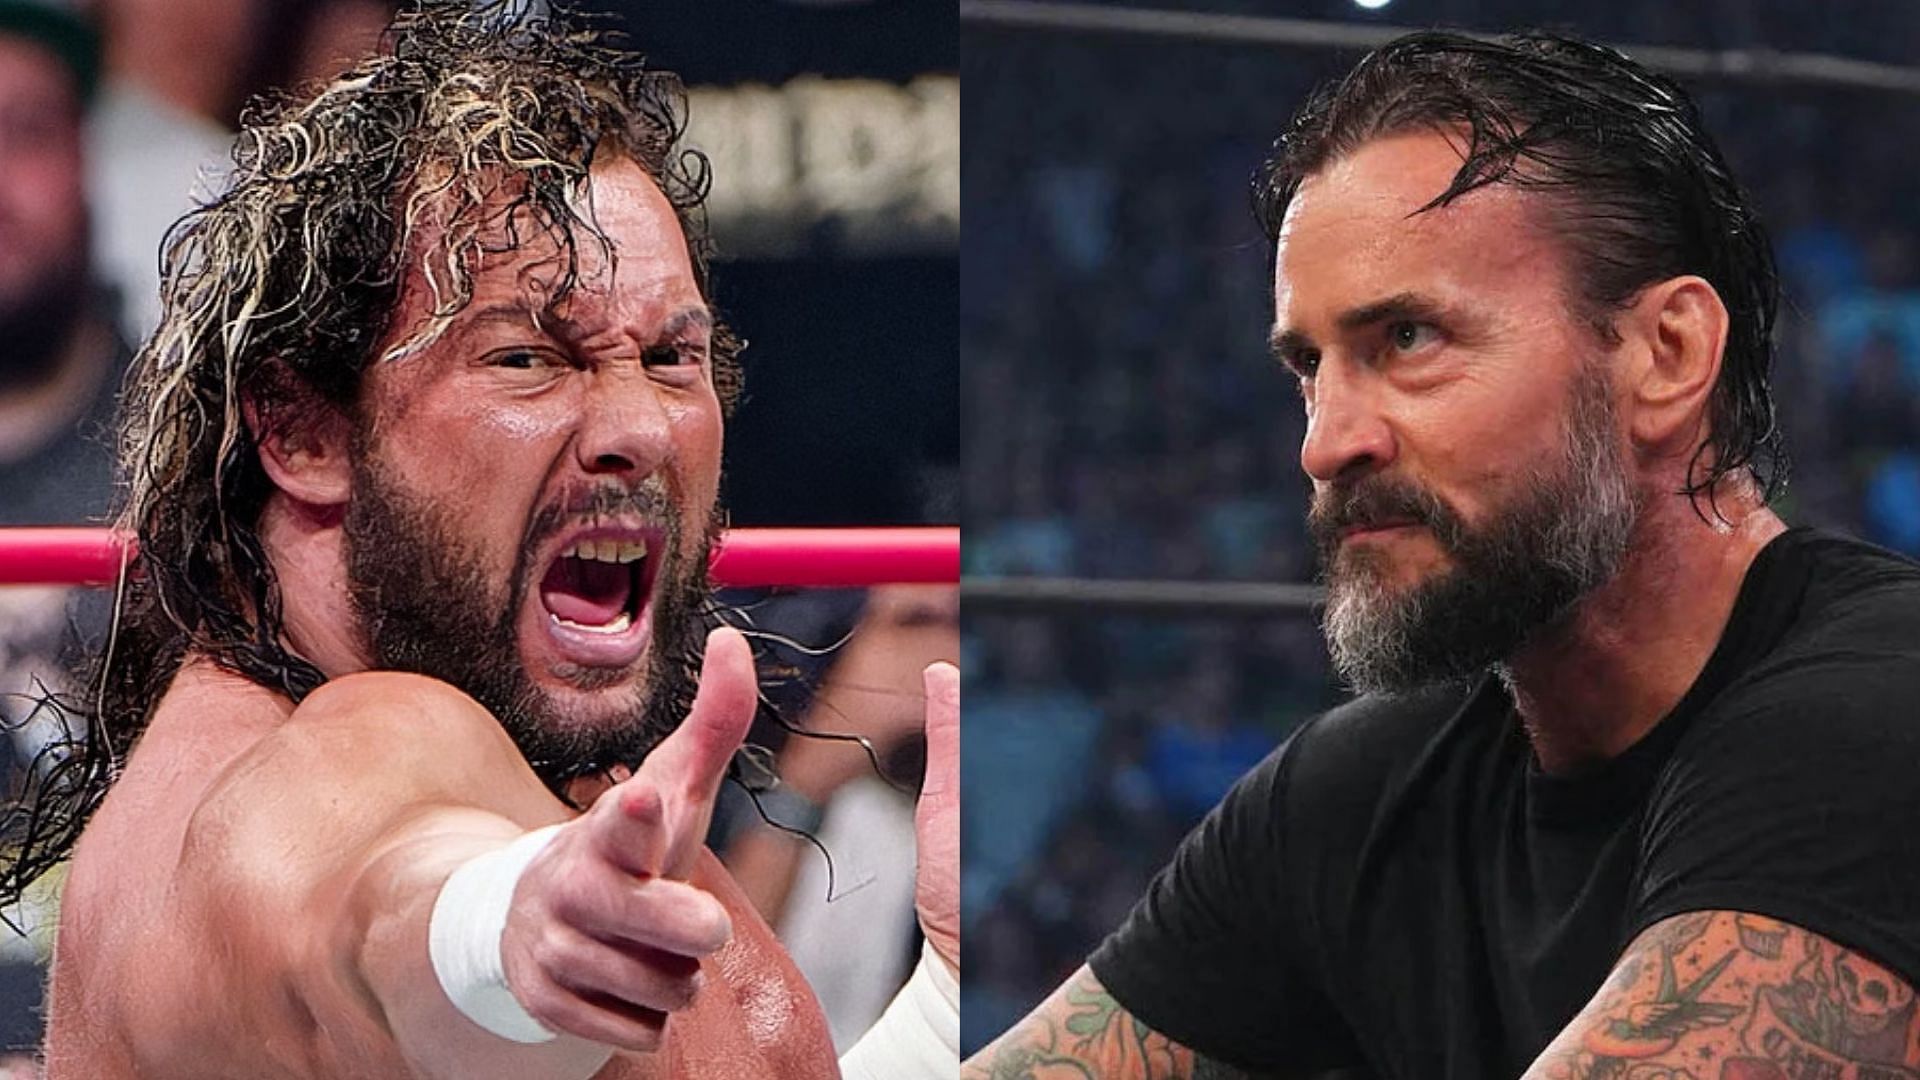 Kenny Omega and CM Punk never faced each other in a wrestling match